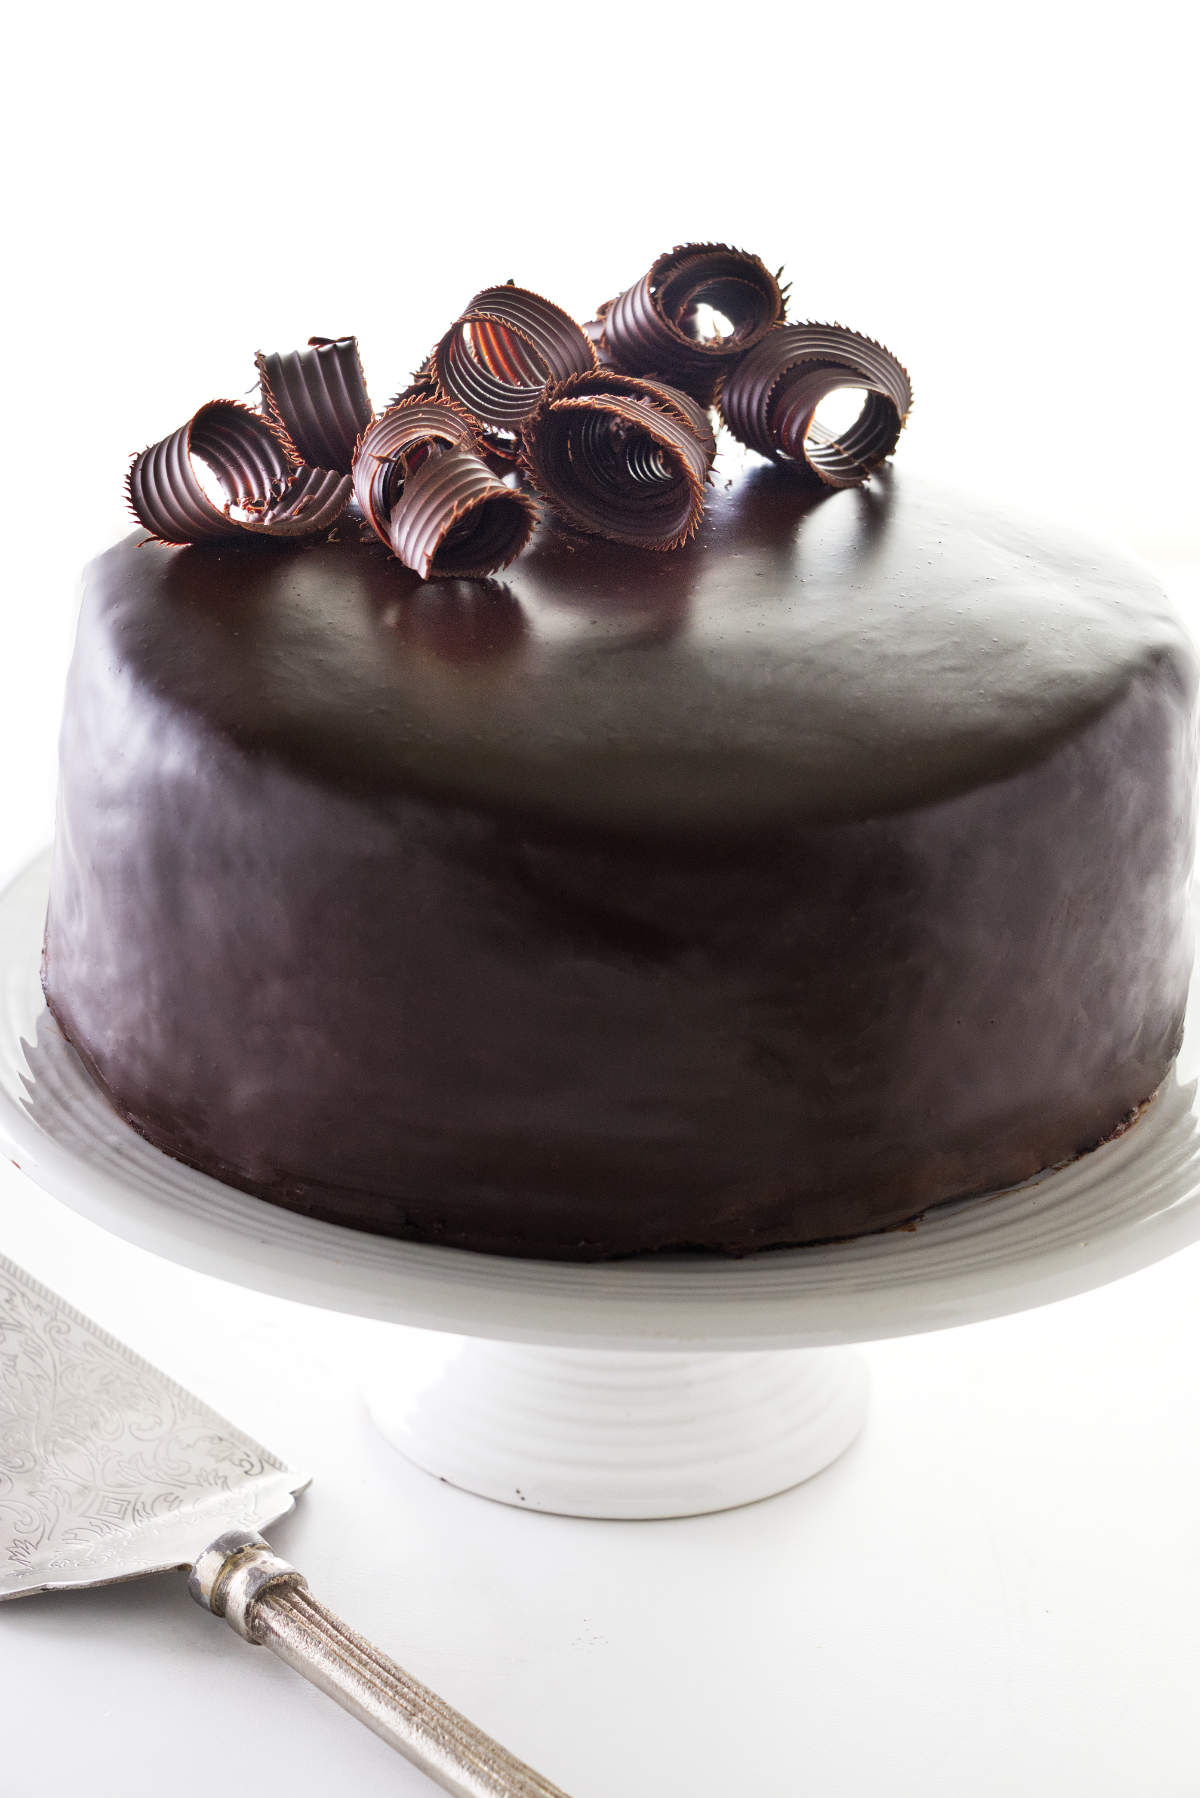 Chocolate Ganache Cake on a cake pedestal and decorated with chocolate curls.